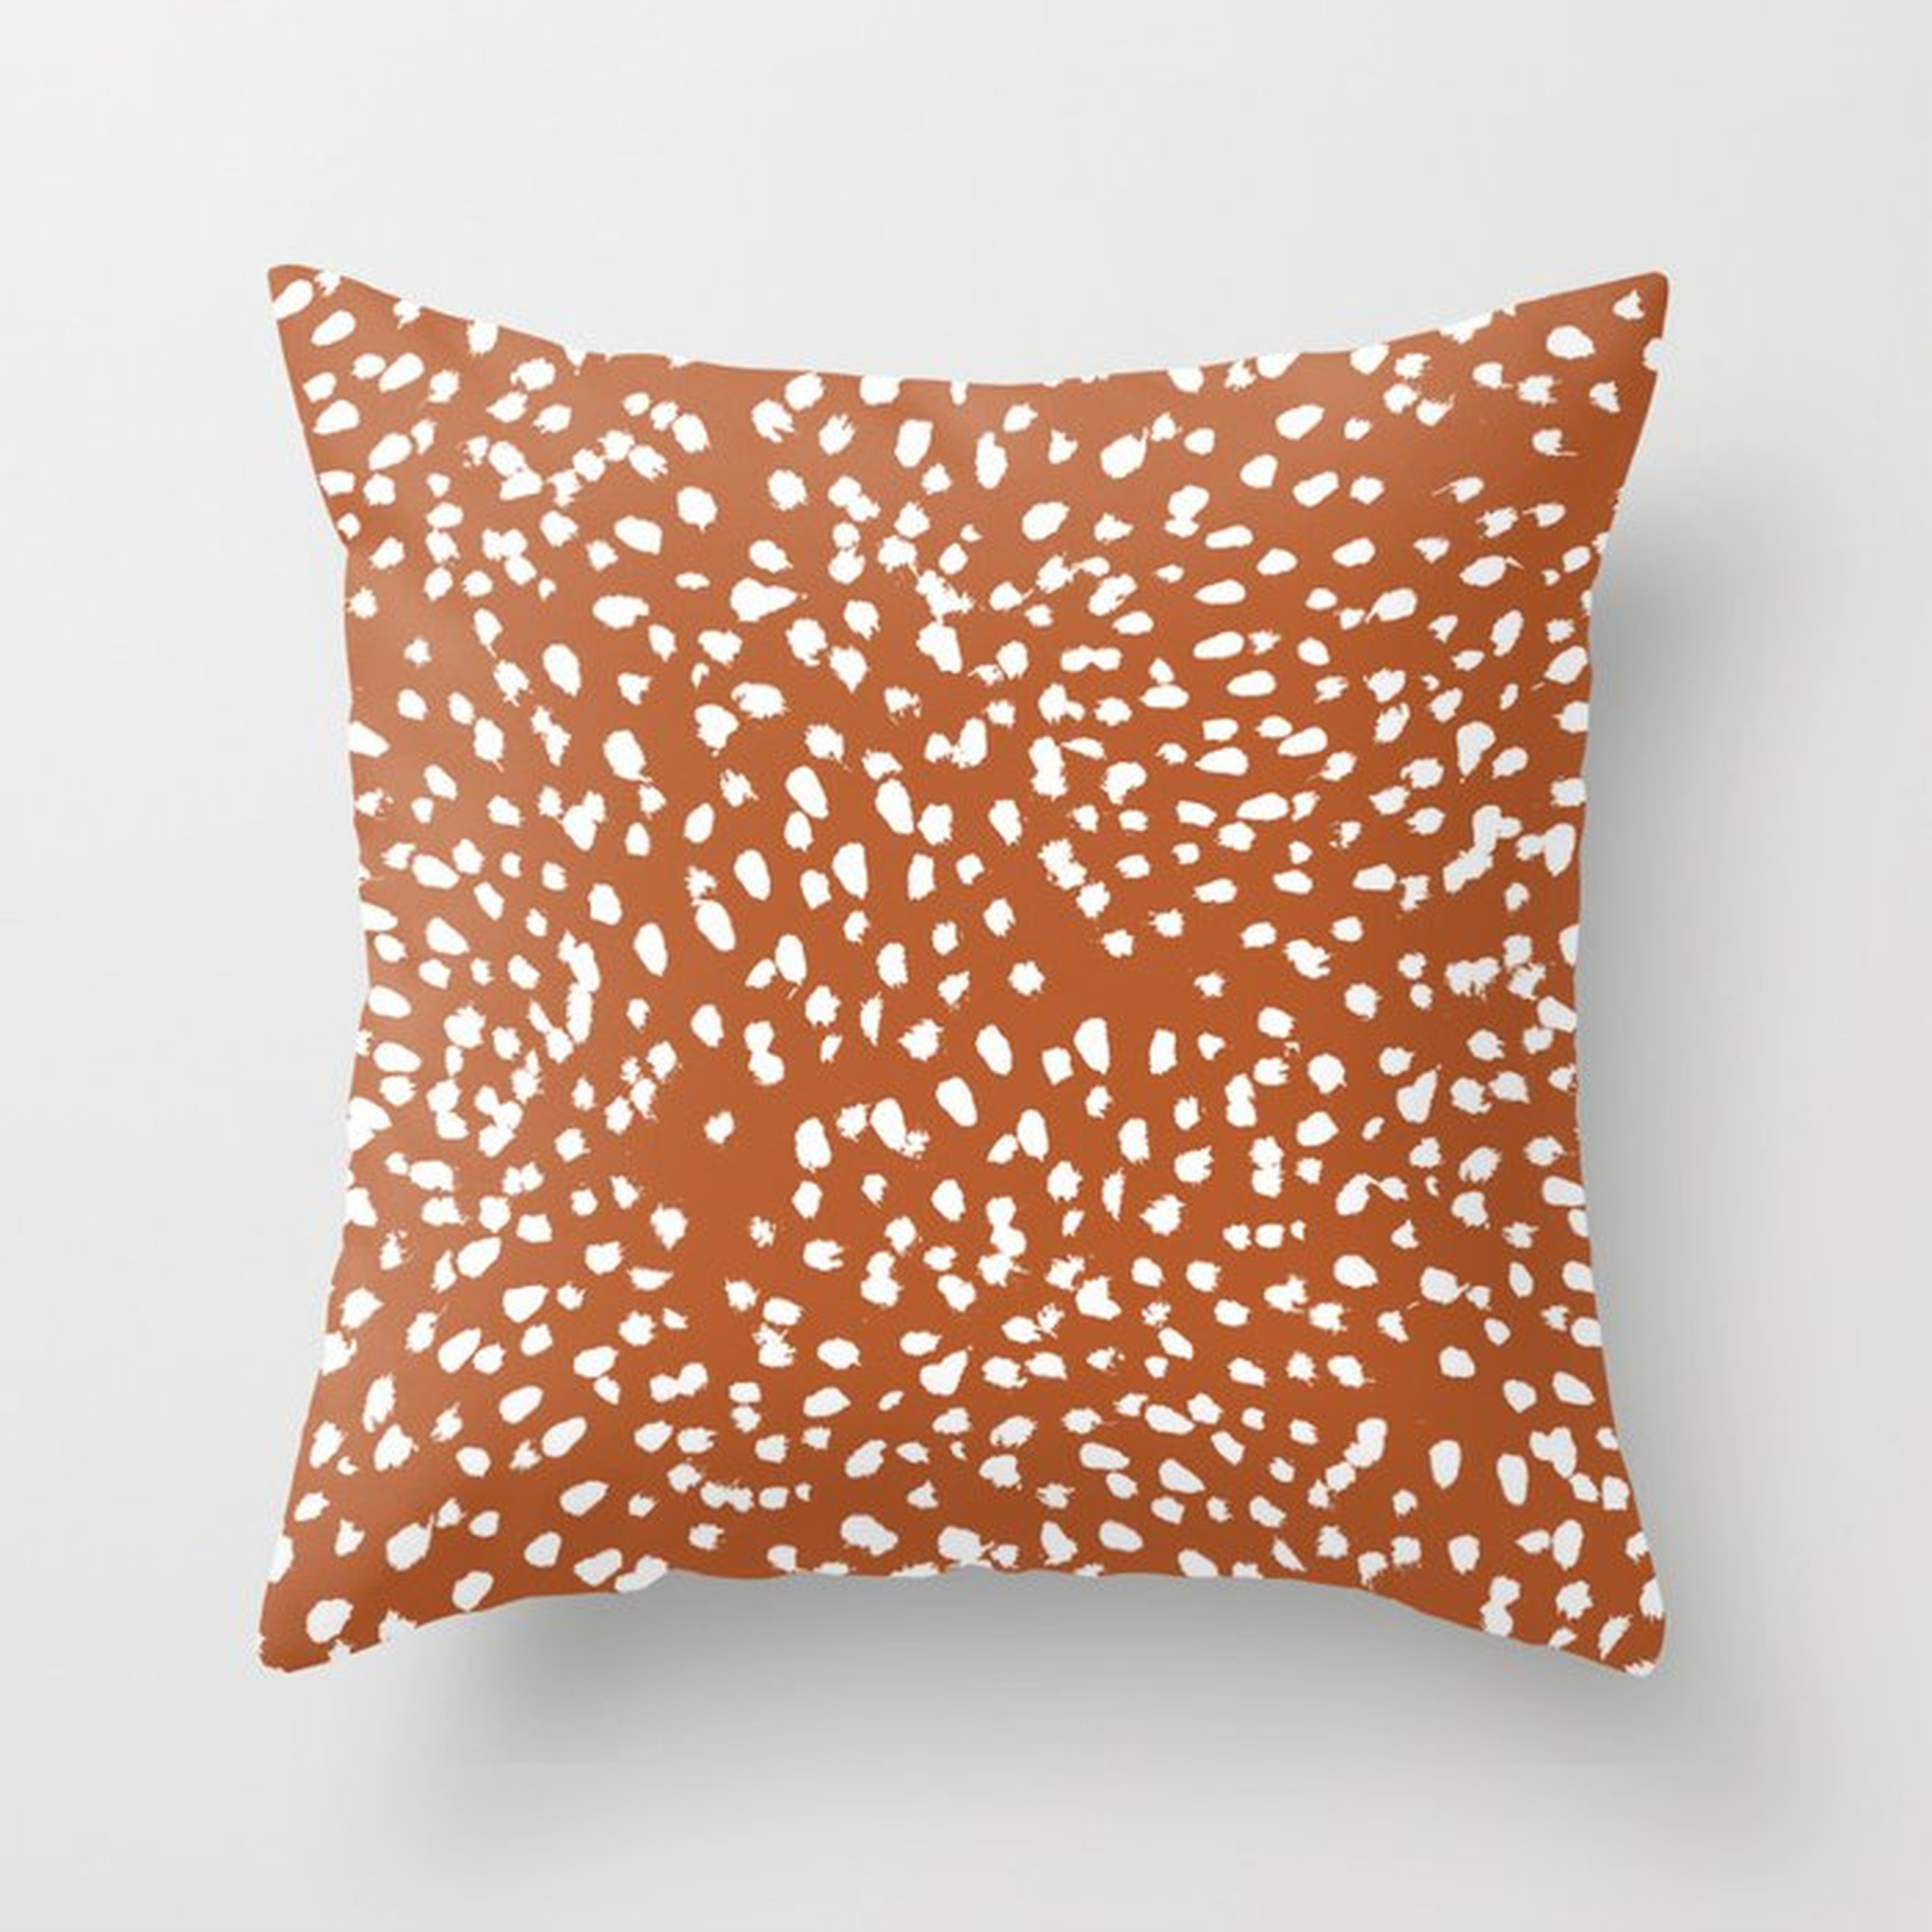 Rust Dots - Painted Dots, Terracotta, Clay, Earth, Earth Toned, Boho, Brown, Brown Dots, Rust Orange, Painted Dots Throw Pillow by Charlottewinter - Cover (18" x 18") With Pillow Insert - Outdoor Pillow - Society6